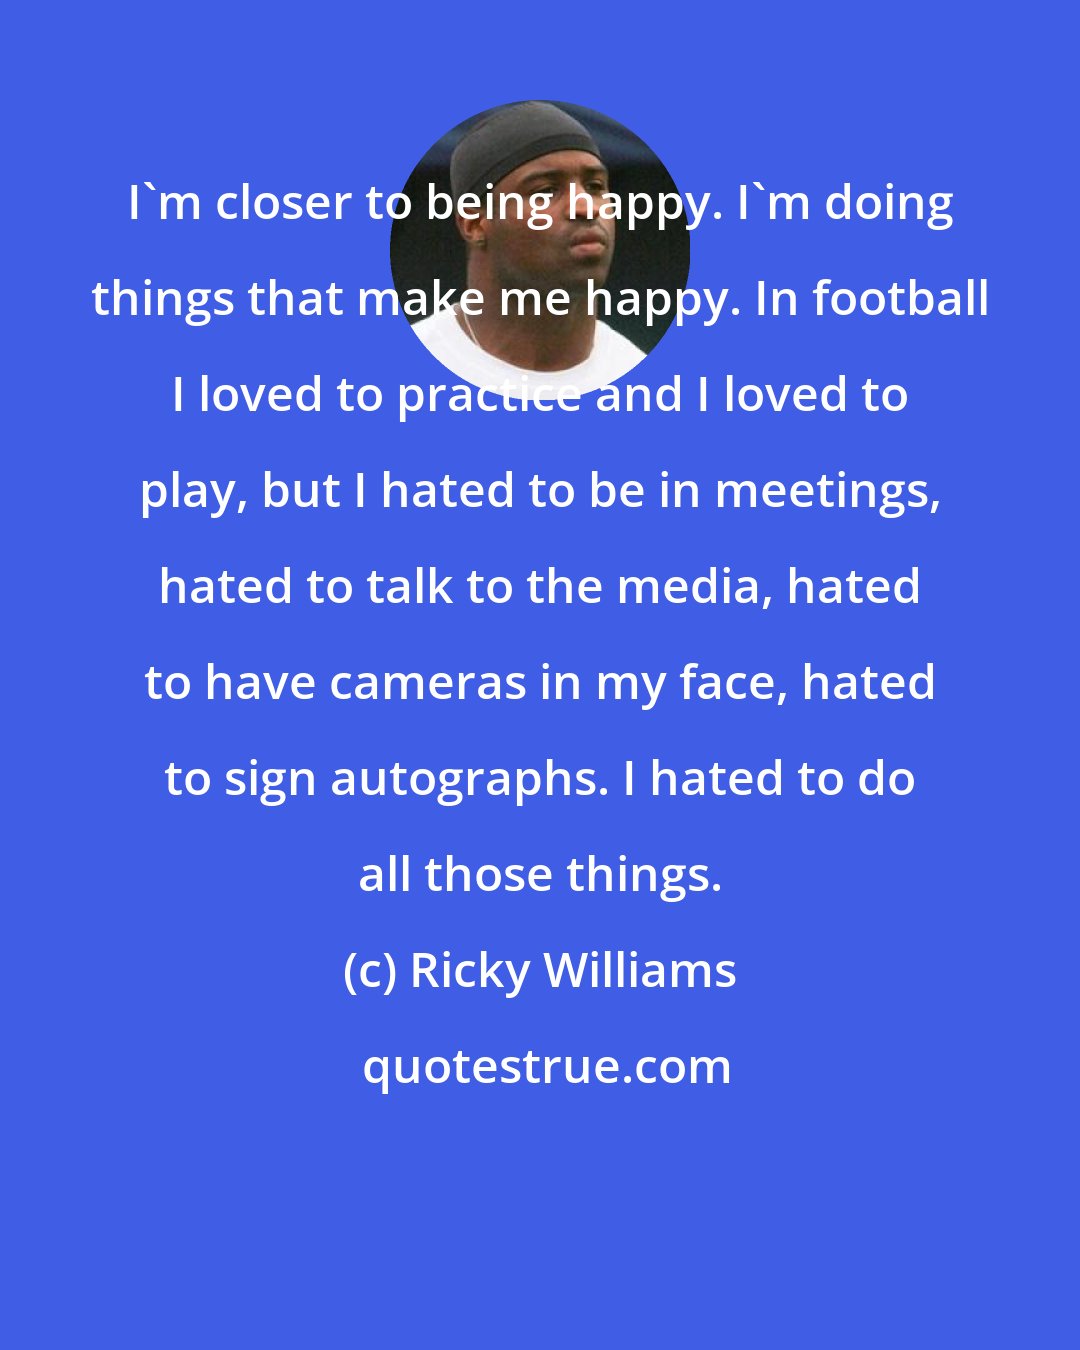 Ricky Williams: I'm closer to being happy. I'm doing things that make me happy. In football I loved to practice and I loved to play, but I hated to be in meetings, hated to talk to the media, hated to have cameras in my face, hated to sign autographs. I hated to do all those things.